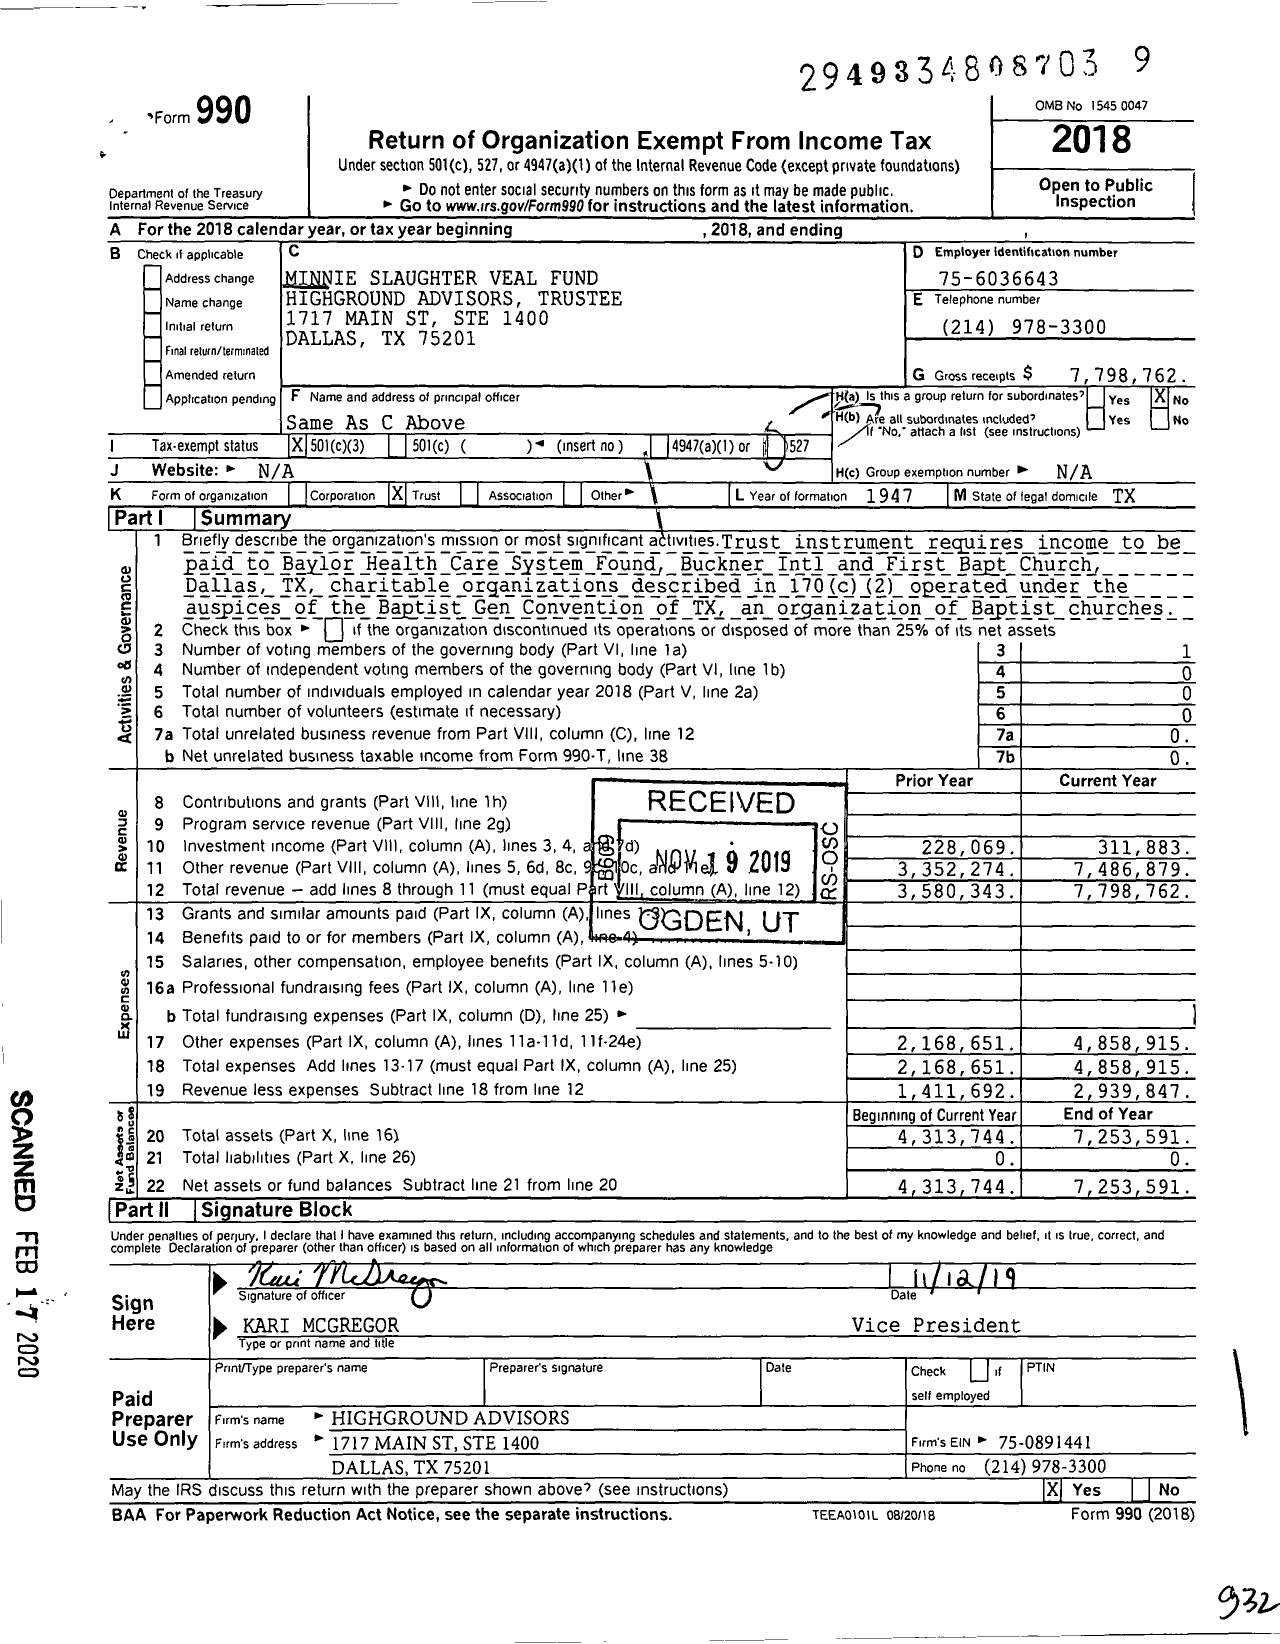 Image of first page of 2018 Form 990 for Minnie Slaughter Veal Fund Highground Advisors Trustee